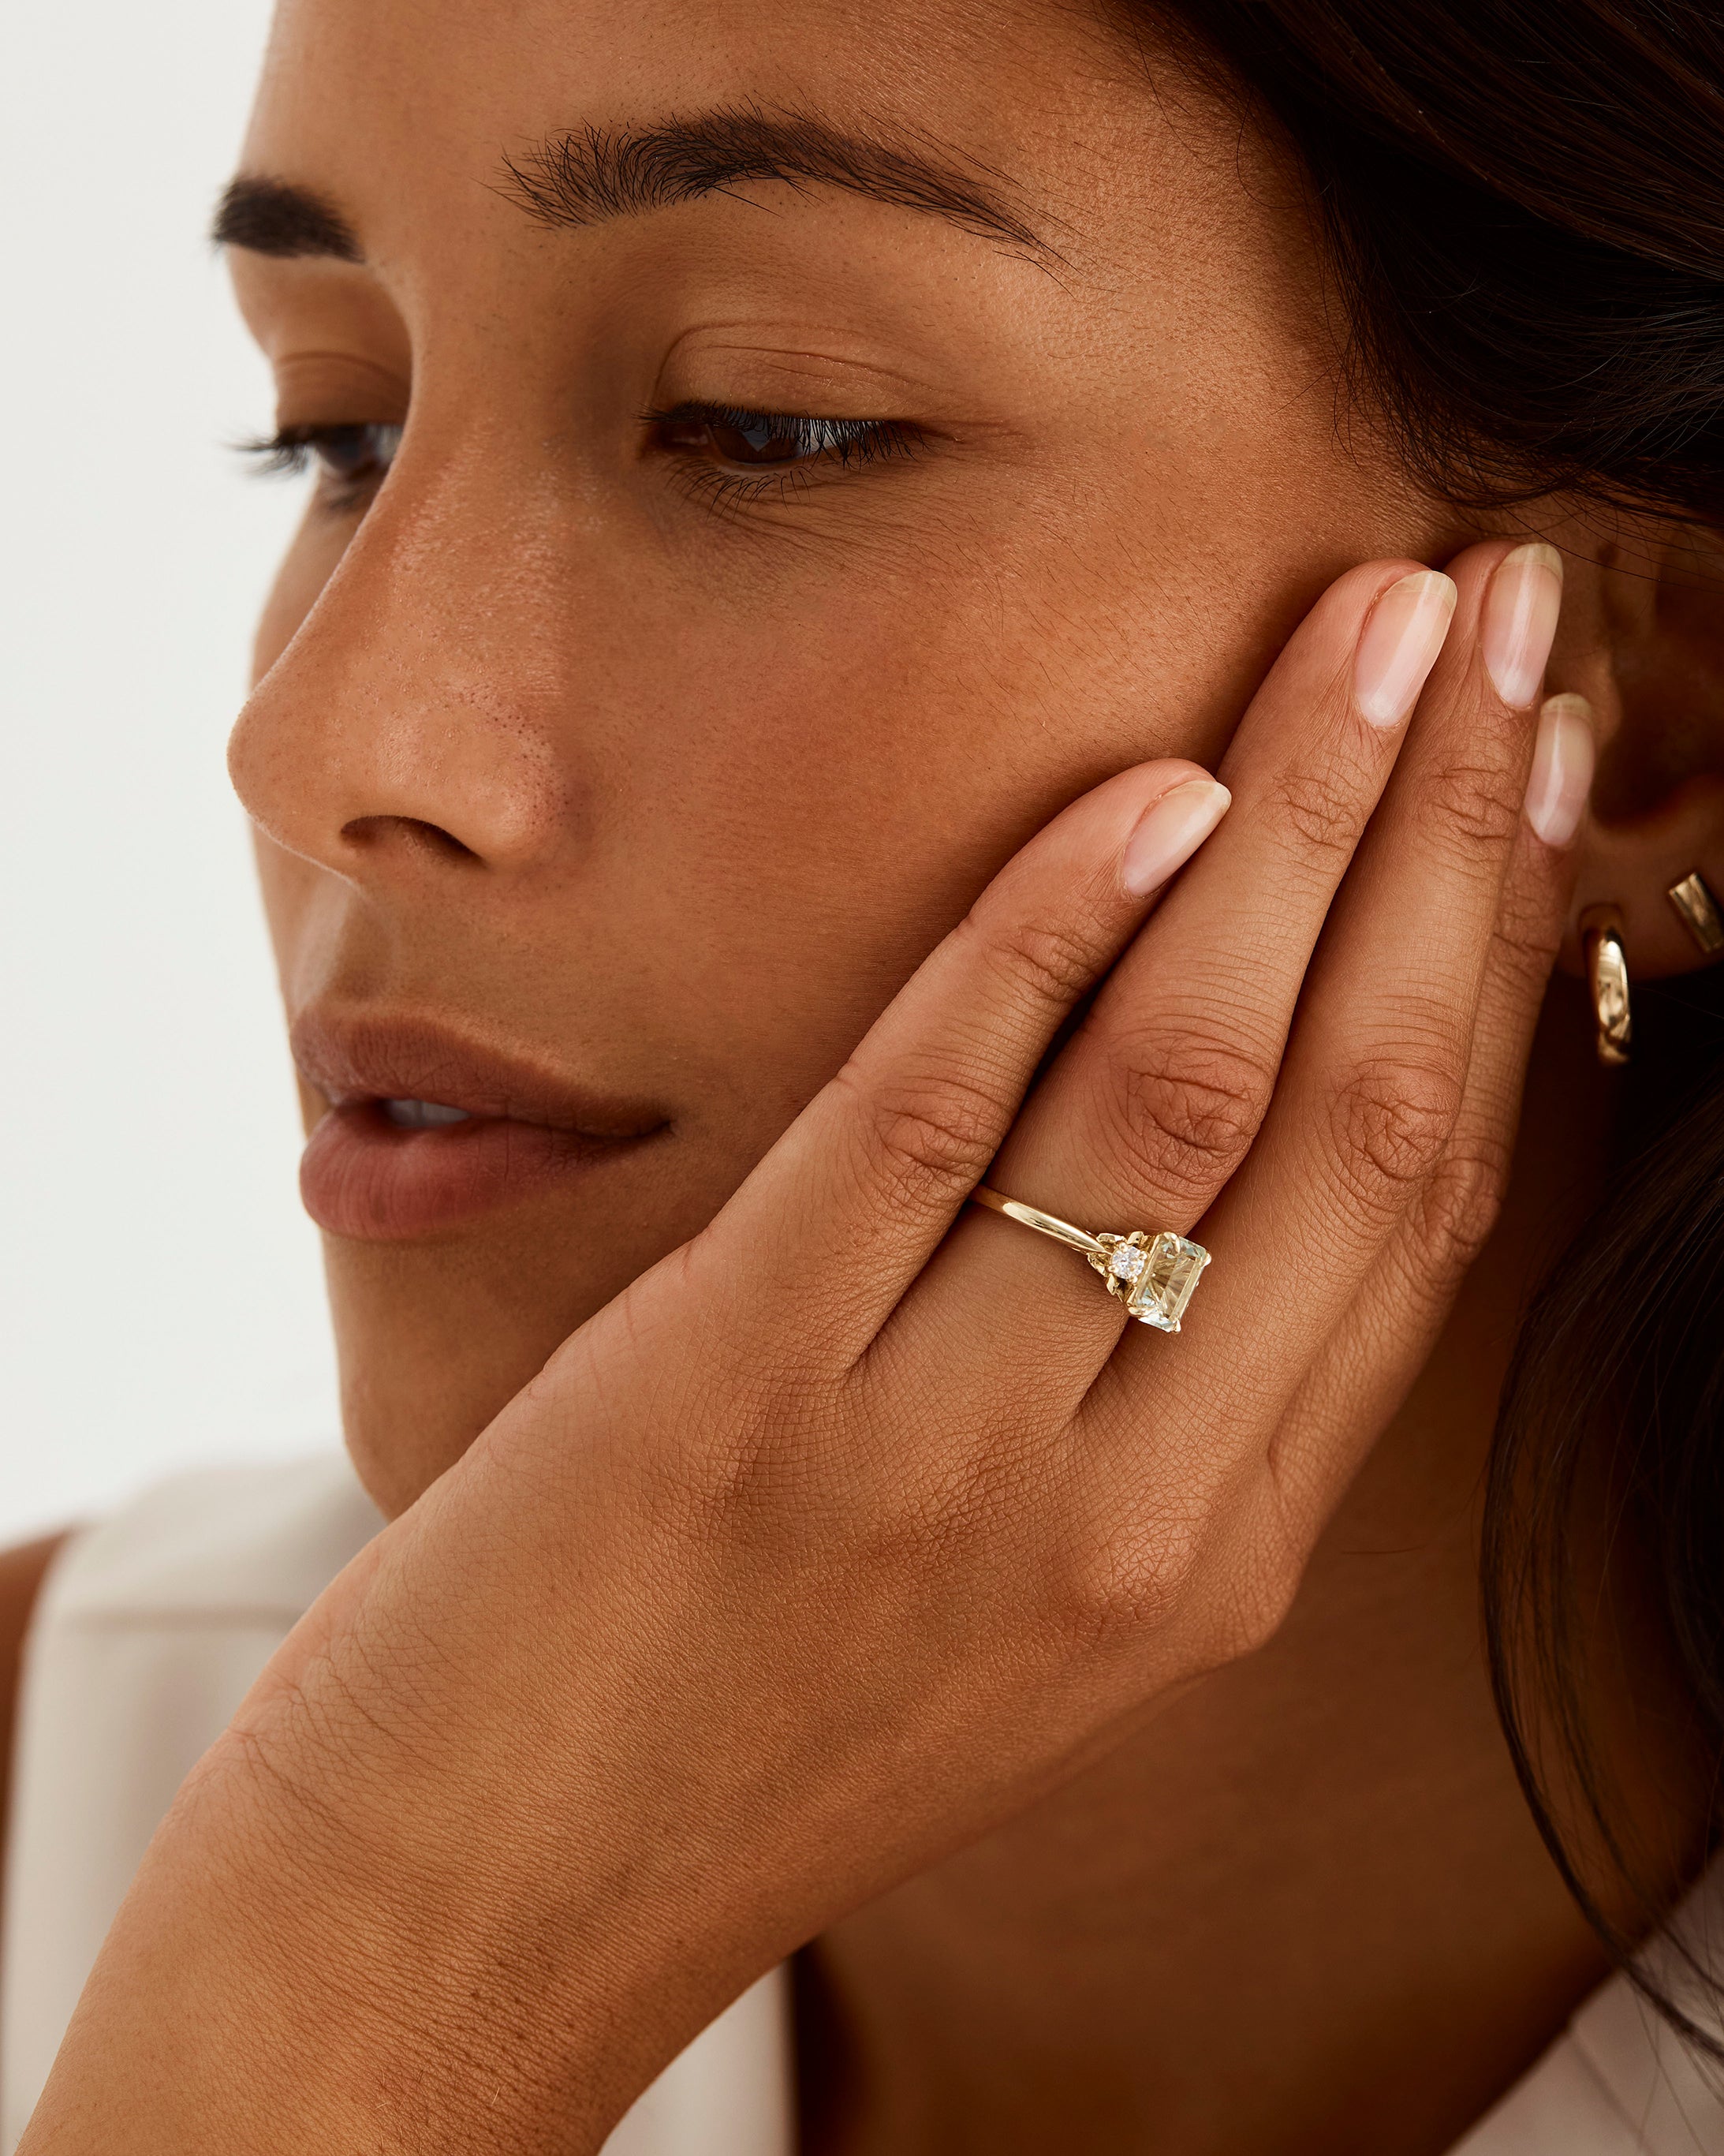 A model wears an emerald cut trio ring featuring petite diamonds and a central green amethyst